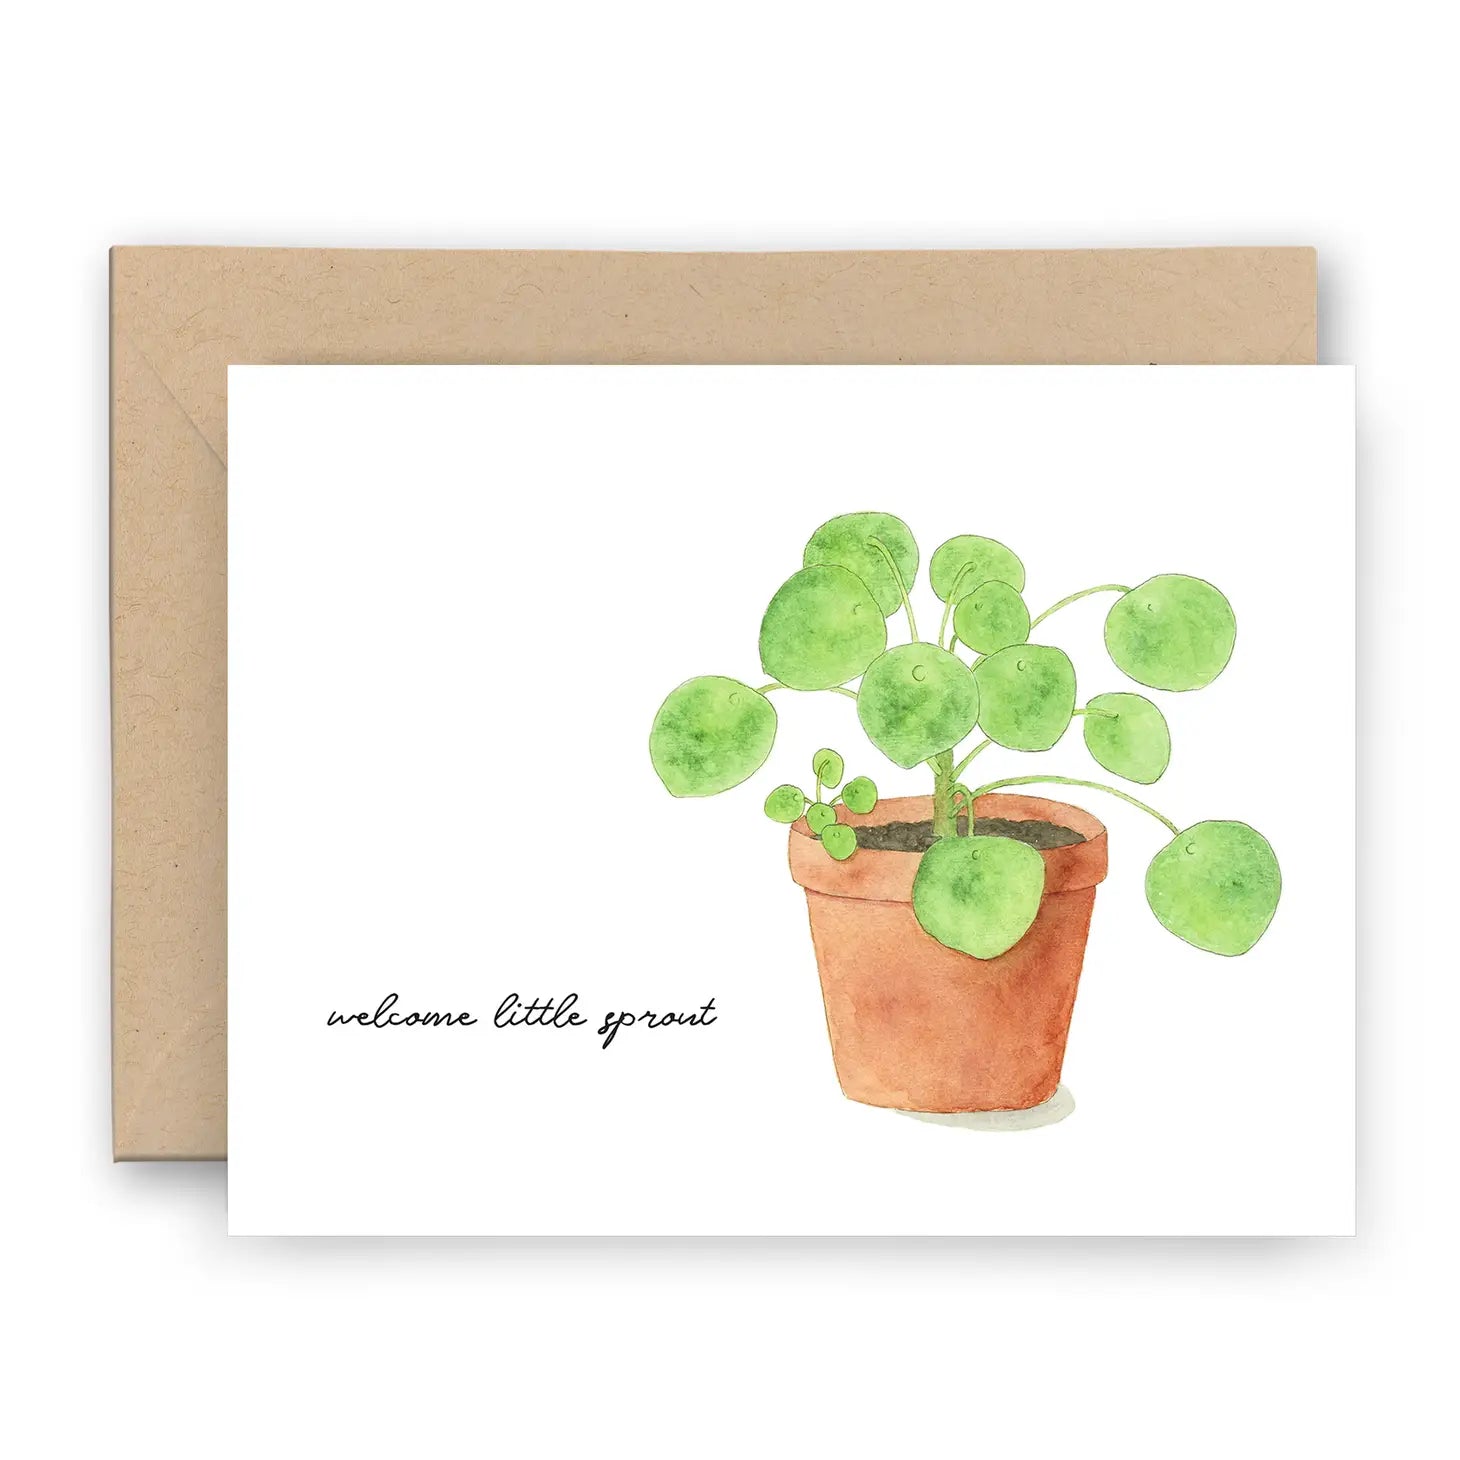 Welcome Little Sprout Hand Drawn Greeting Card